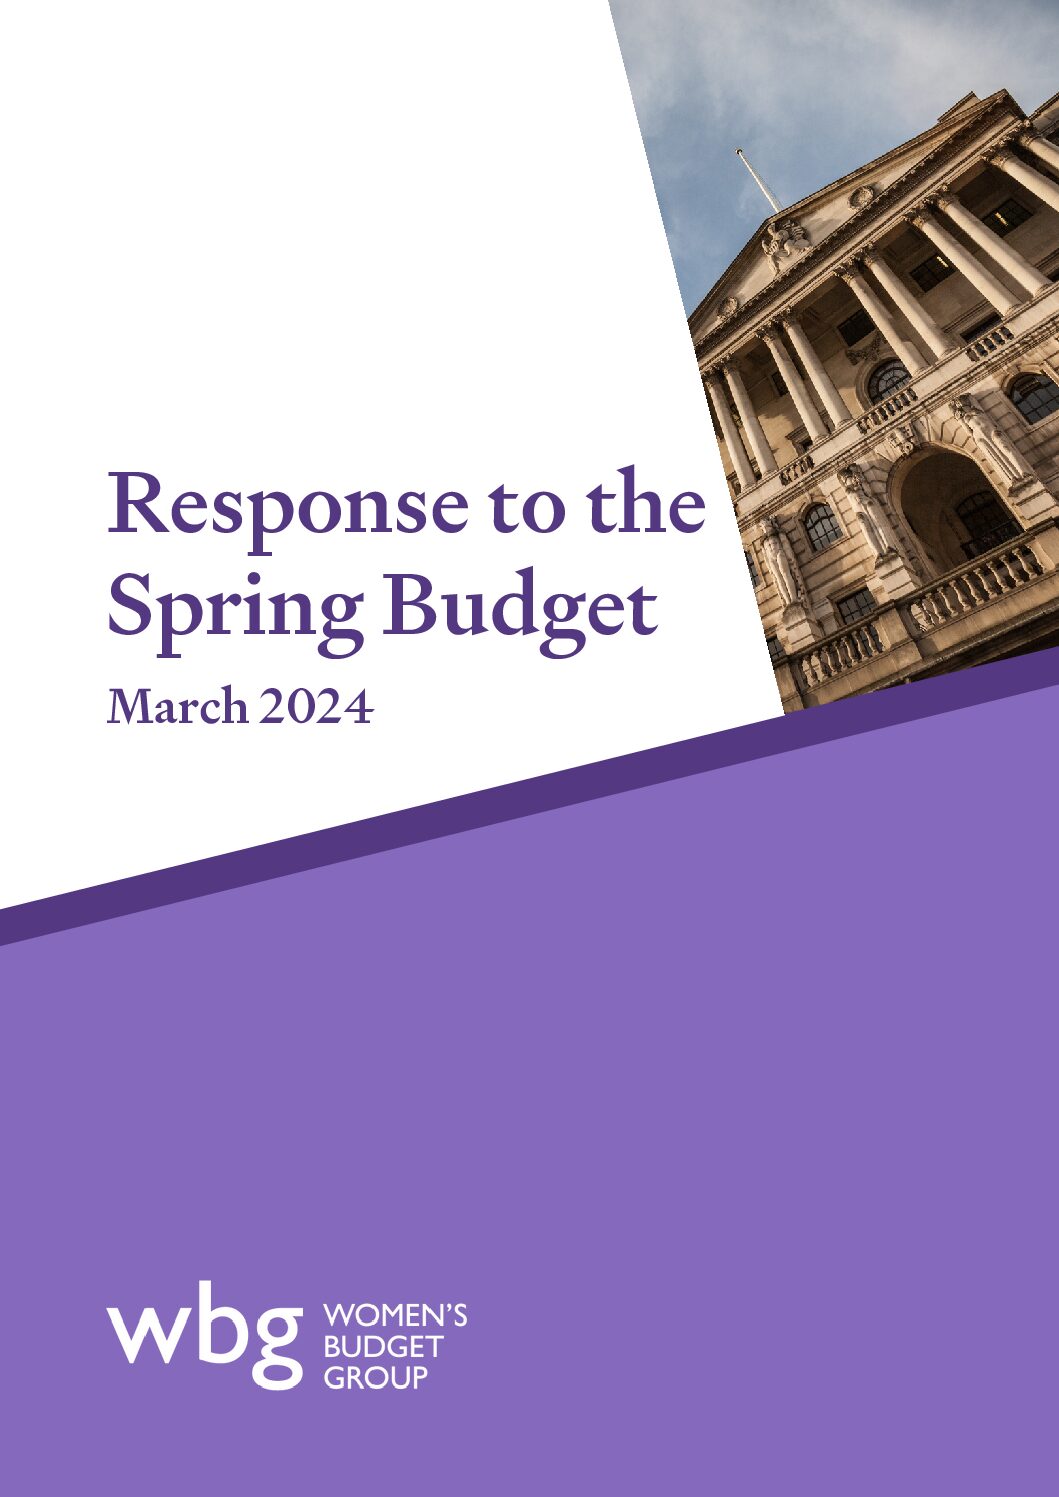 The Spring Budget 2024: A 4 Nations Budget Review Event